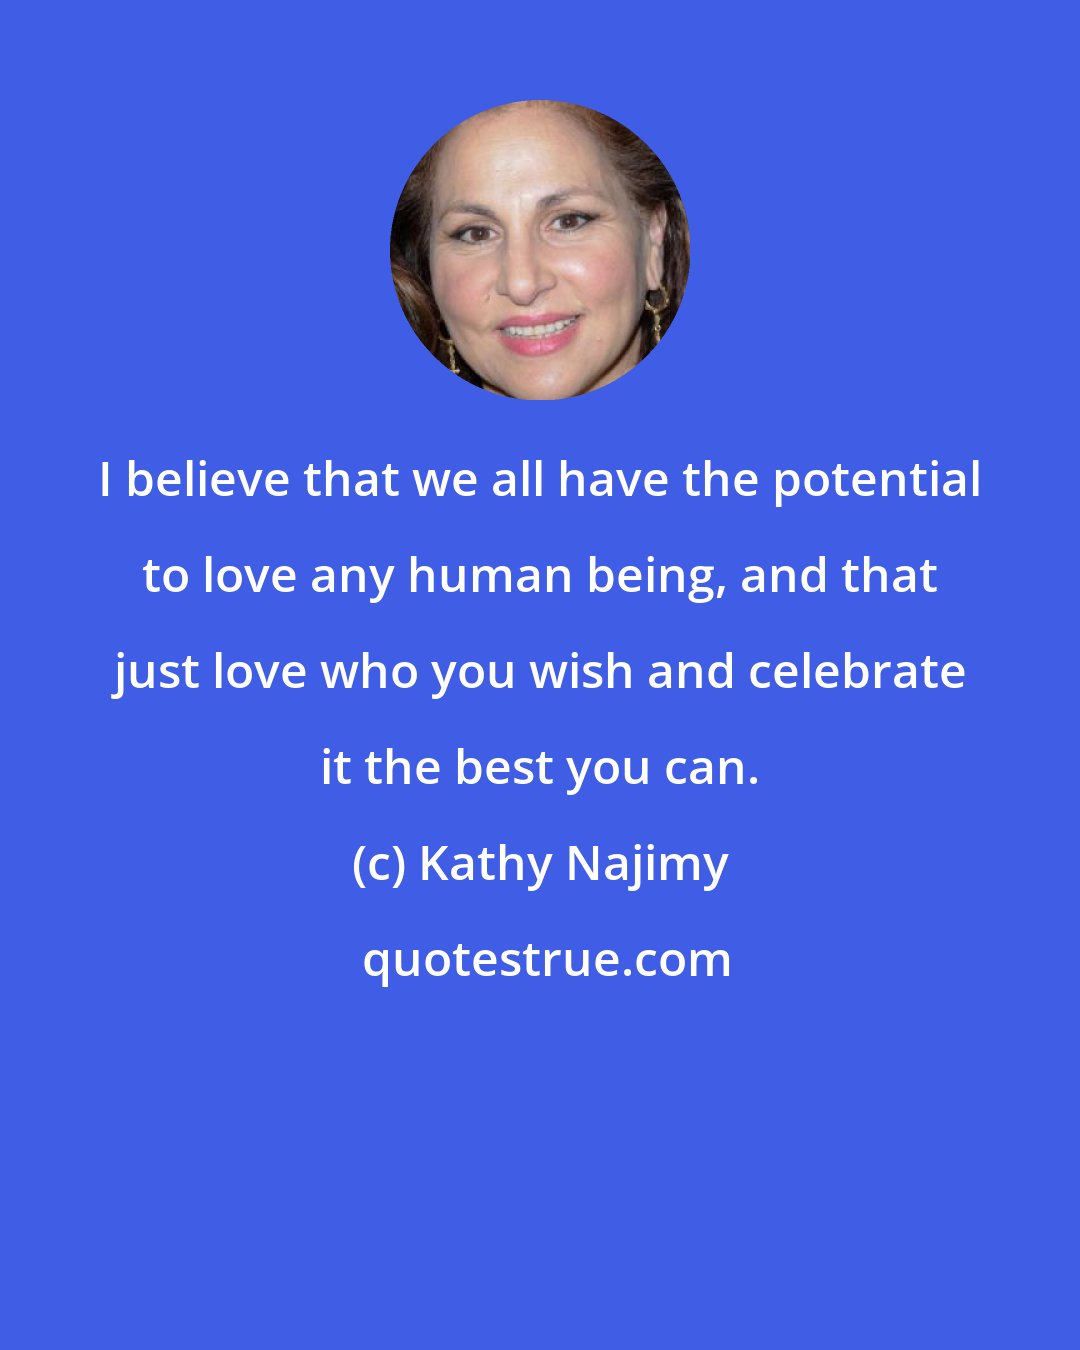 Kathy Najimy: I believe that we all have the potential to love any human being, and that just love who you wish and celebrate it the best you can.